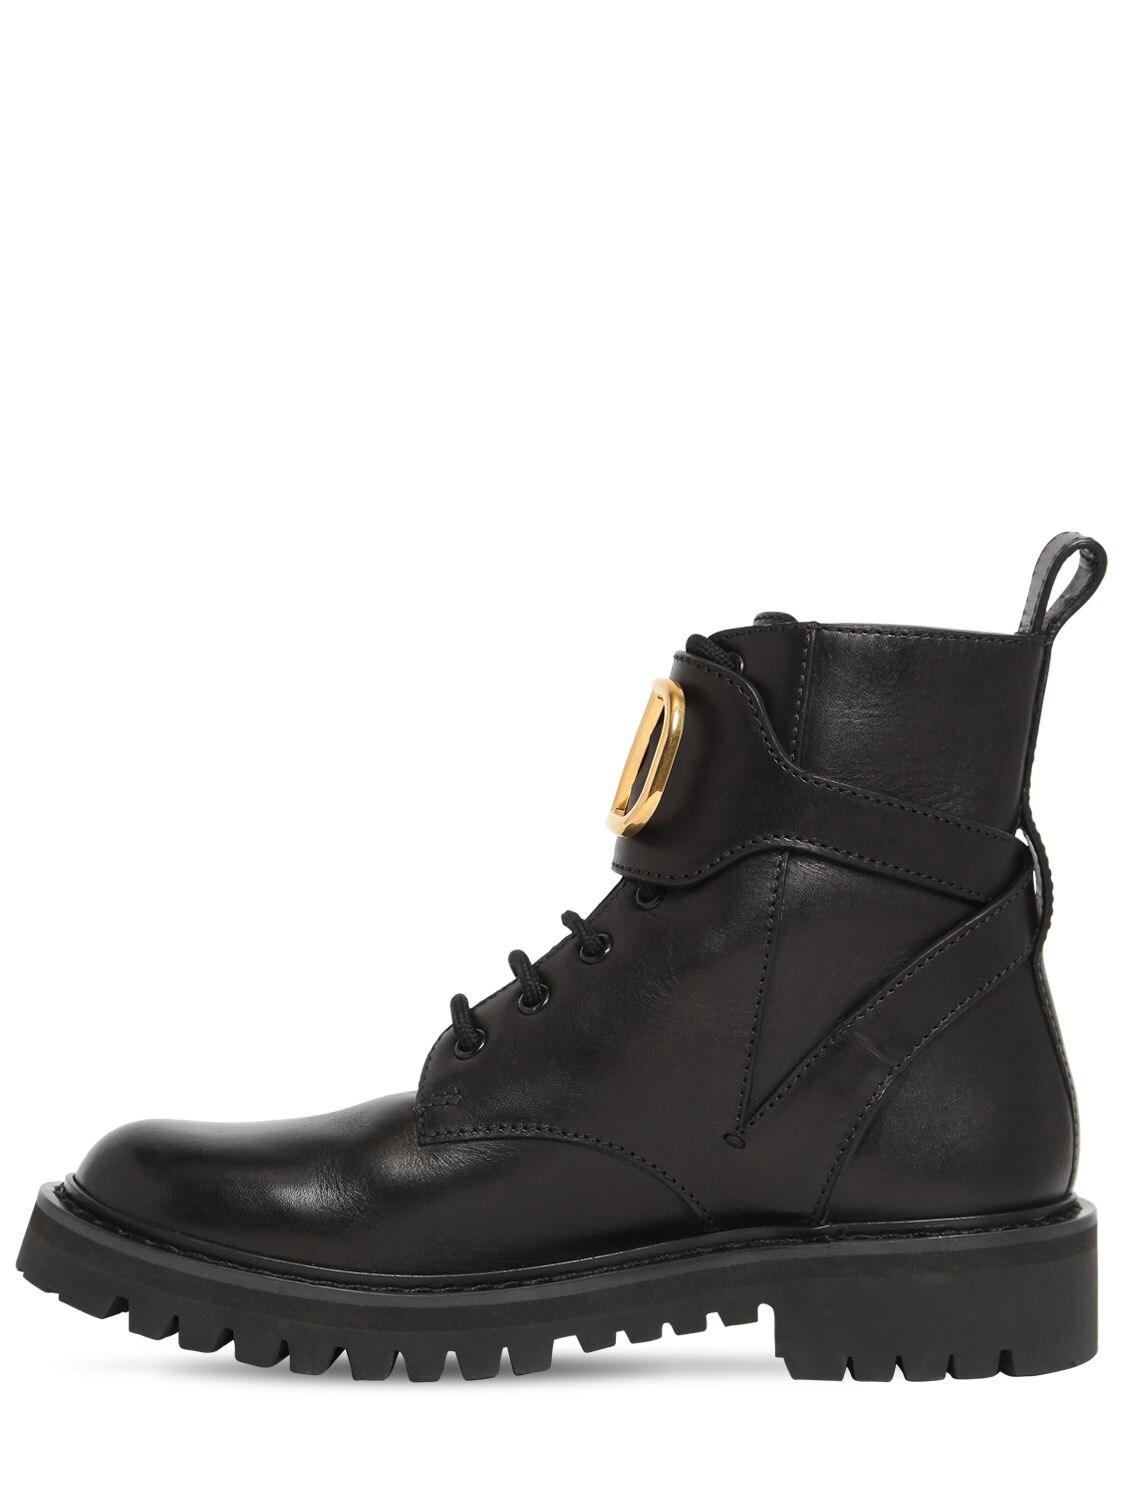 Valentino 35mm Vlogo Leather Combat Boots in Black - Lyst